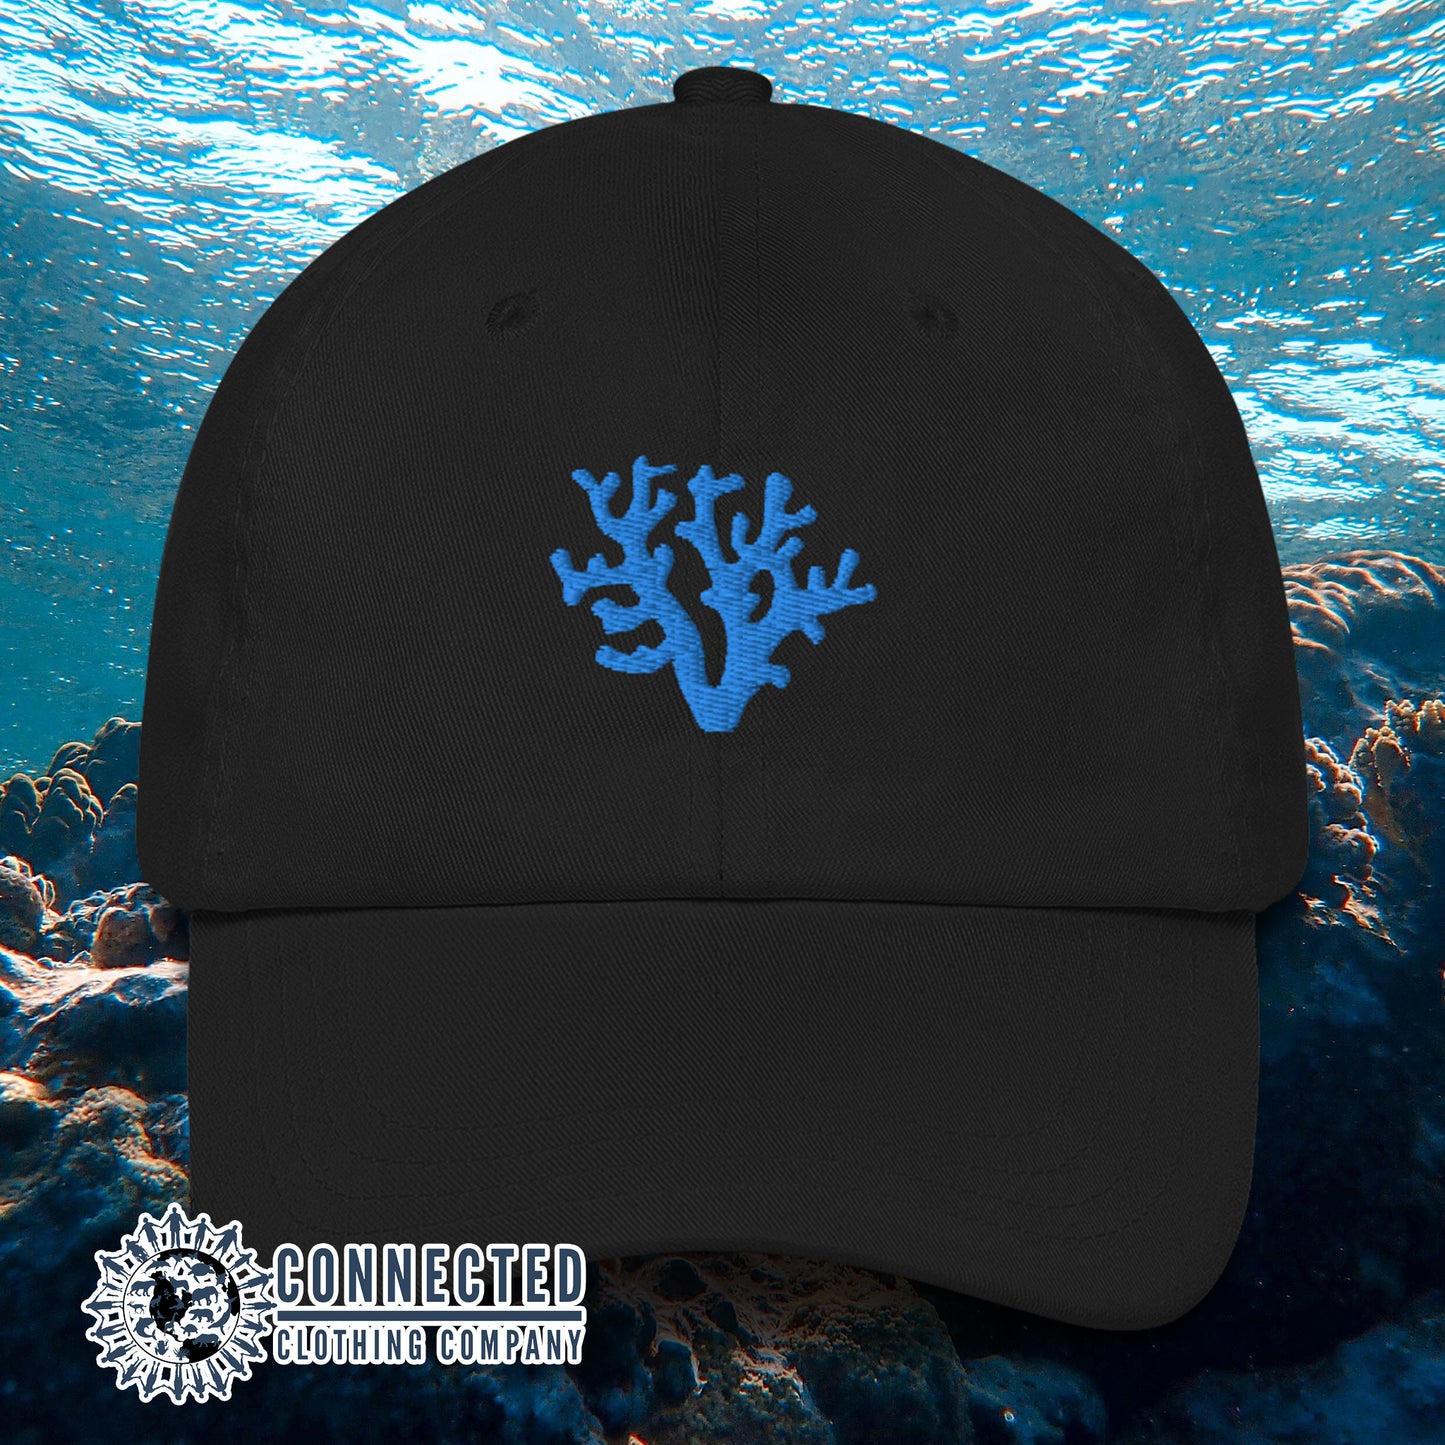 Black Coral Cotton Cap - Connected Clothing Company - Ethically and Sustainably Made - 10% donated to Mission Blue ocean conservation